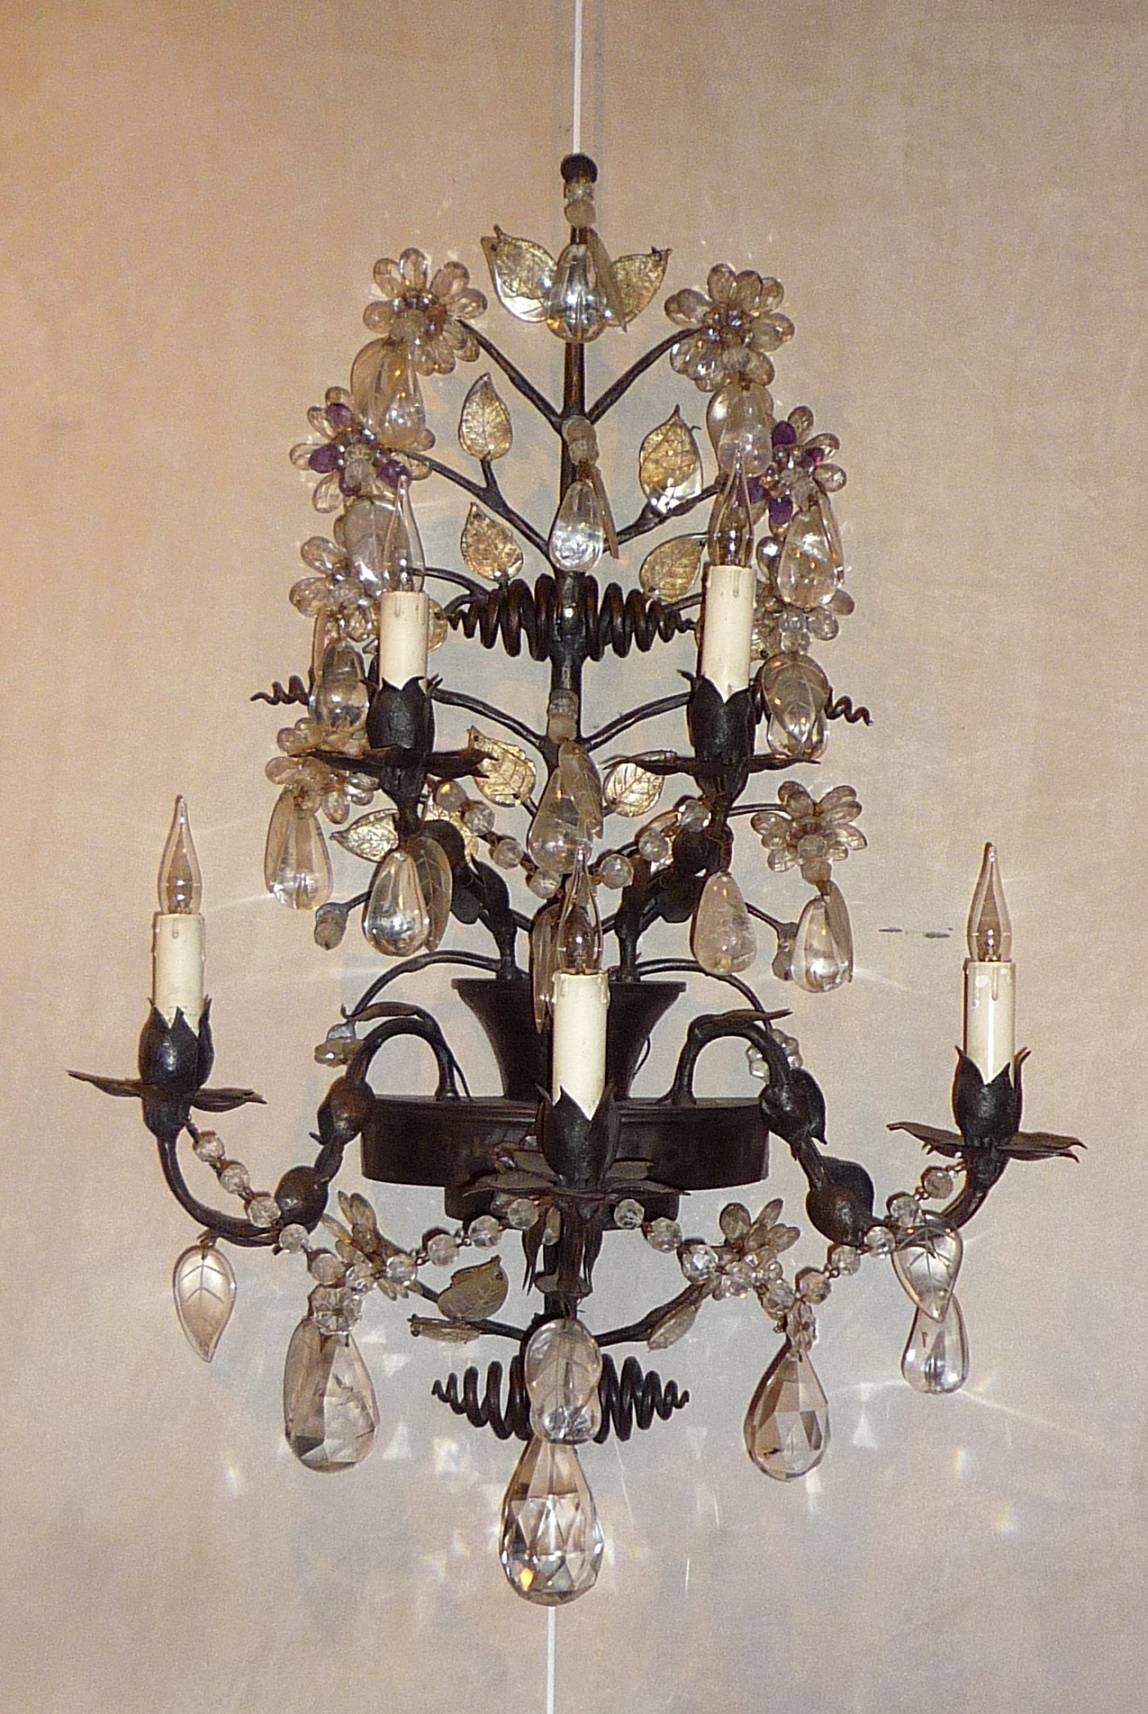 A pair of large French iron and rock crystal sconces, attributed to Maison Baguès, circa 1950 (special order for a private villa).